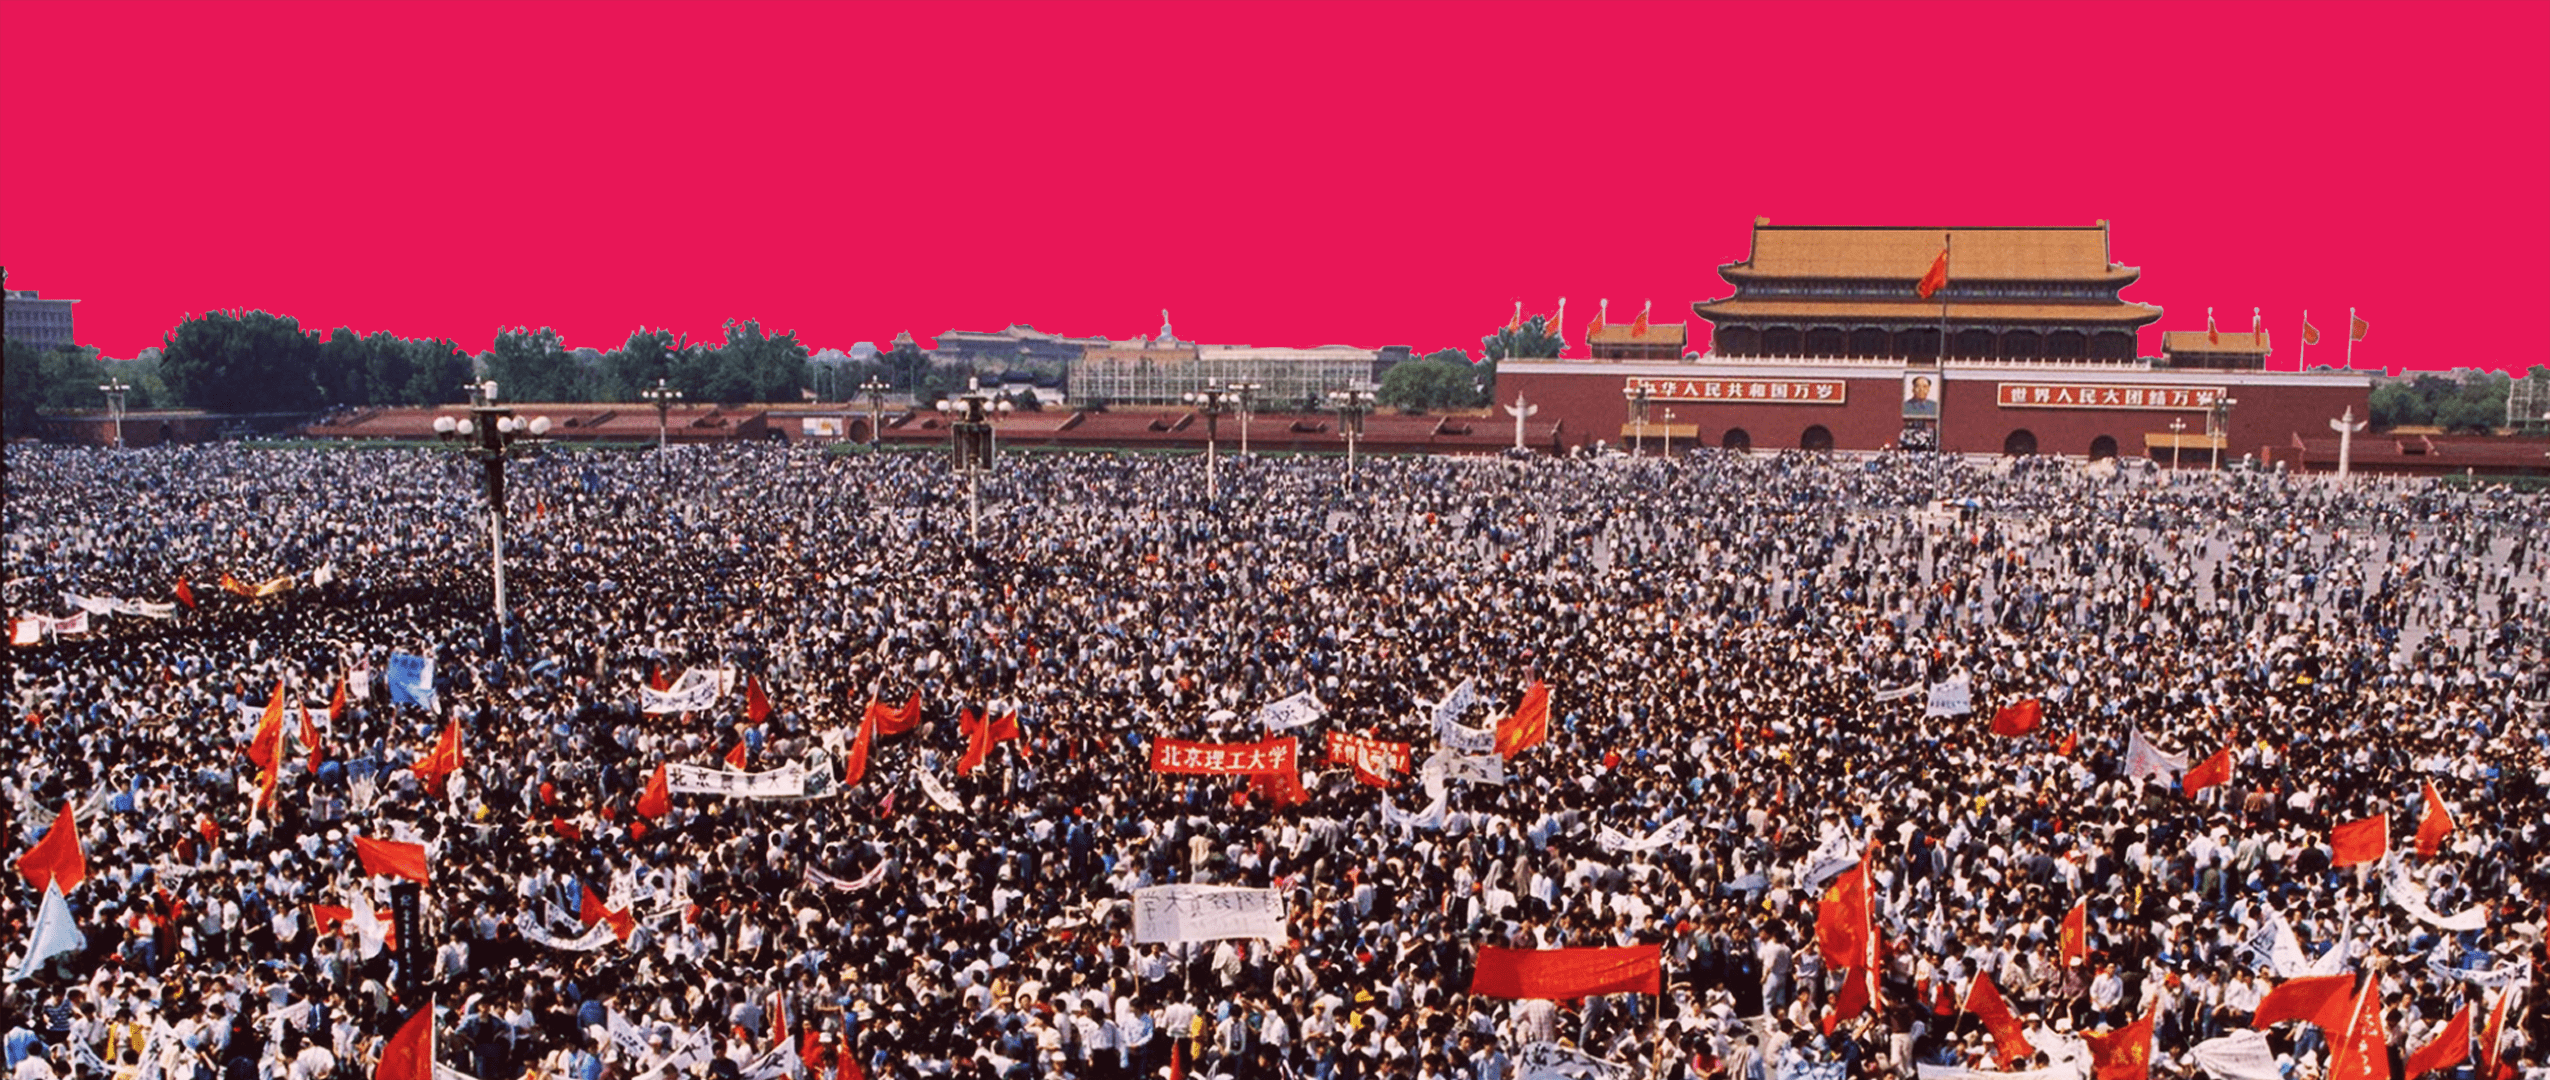 Looking Back On The Tiananmen Massacre: June 4 Live Event